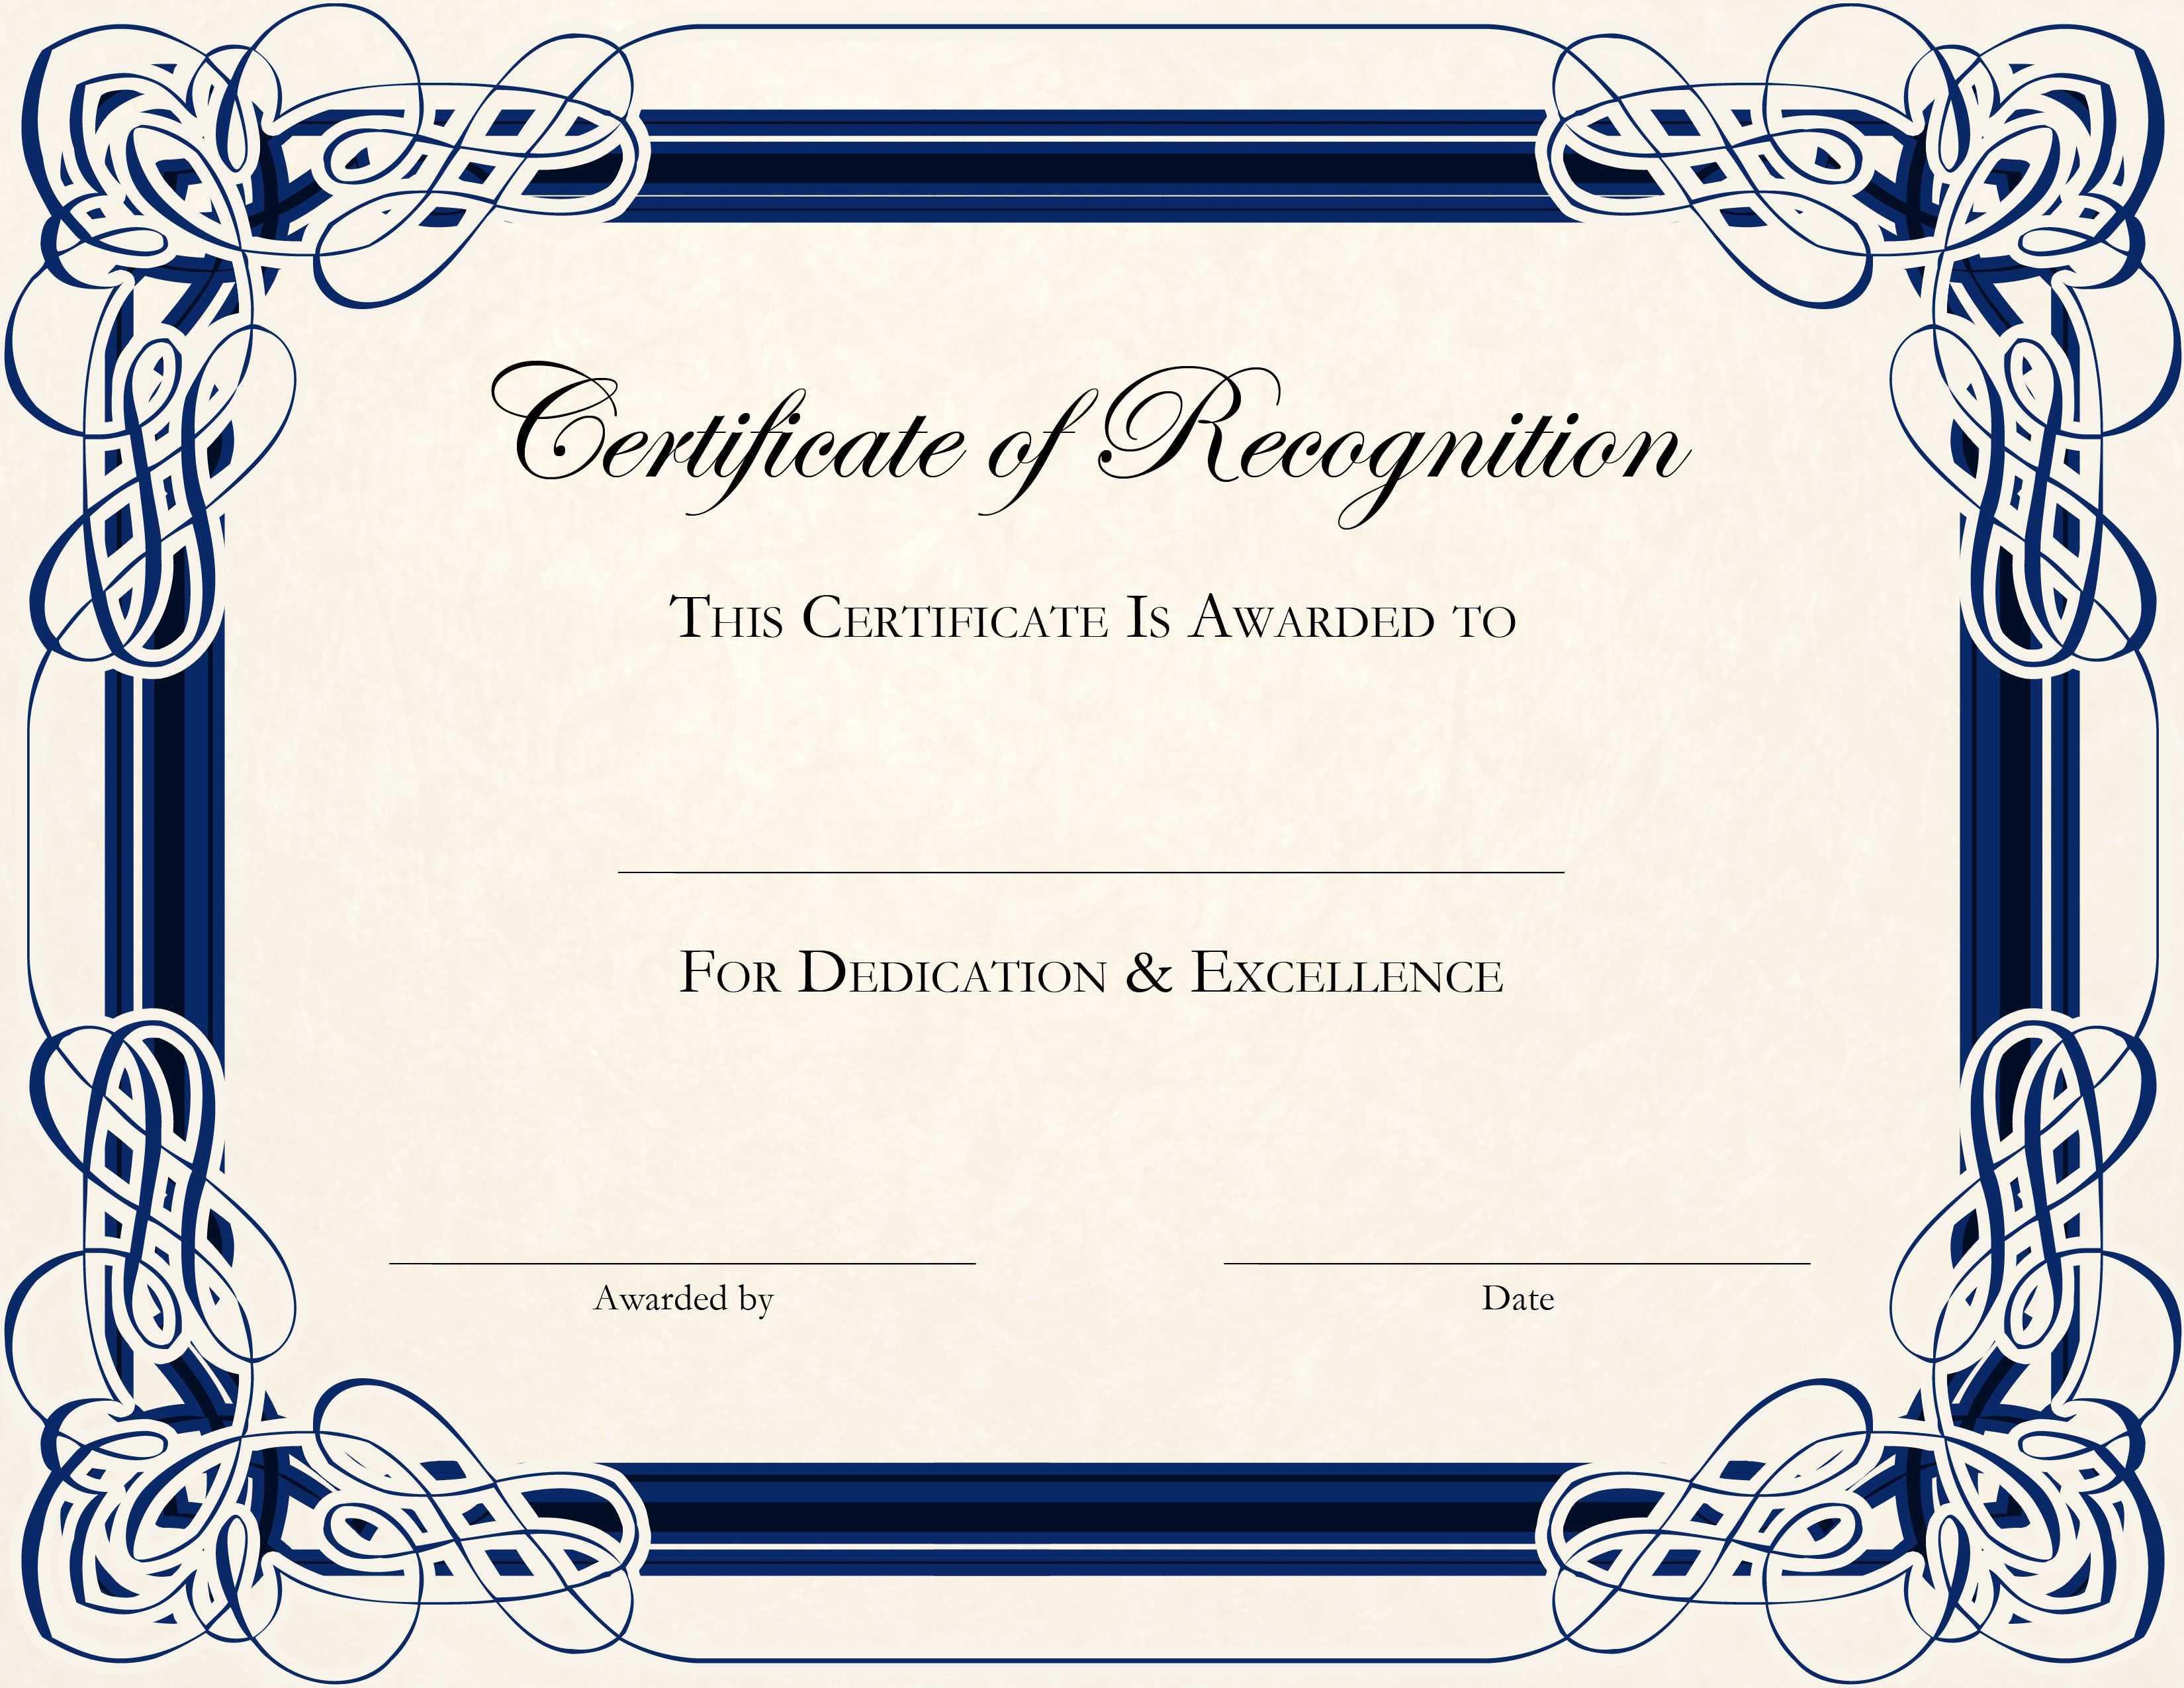 Certificate Template Designs Recognition Docs | Blankets Regarding Free Template For Certificate Of Recognition